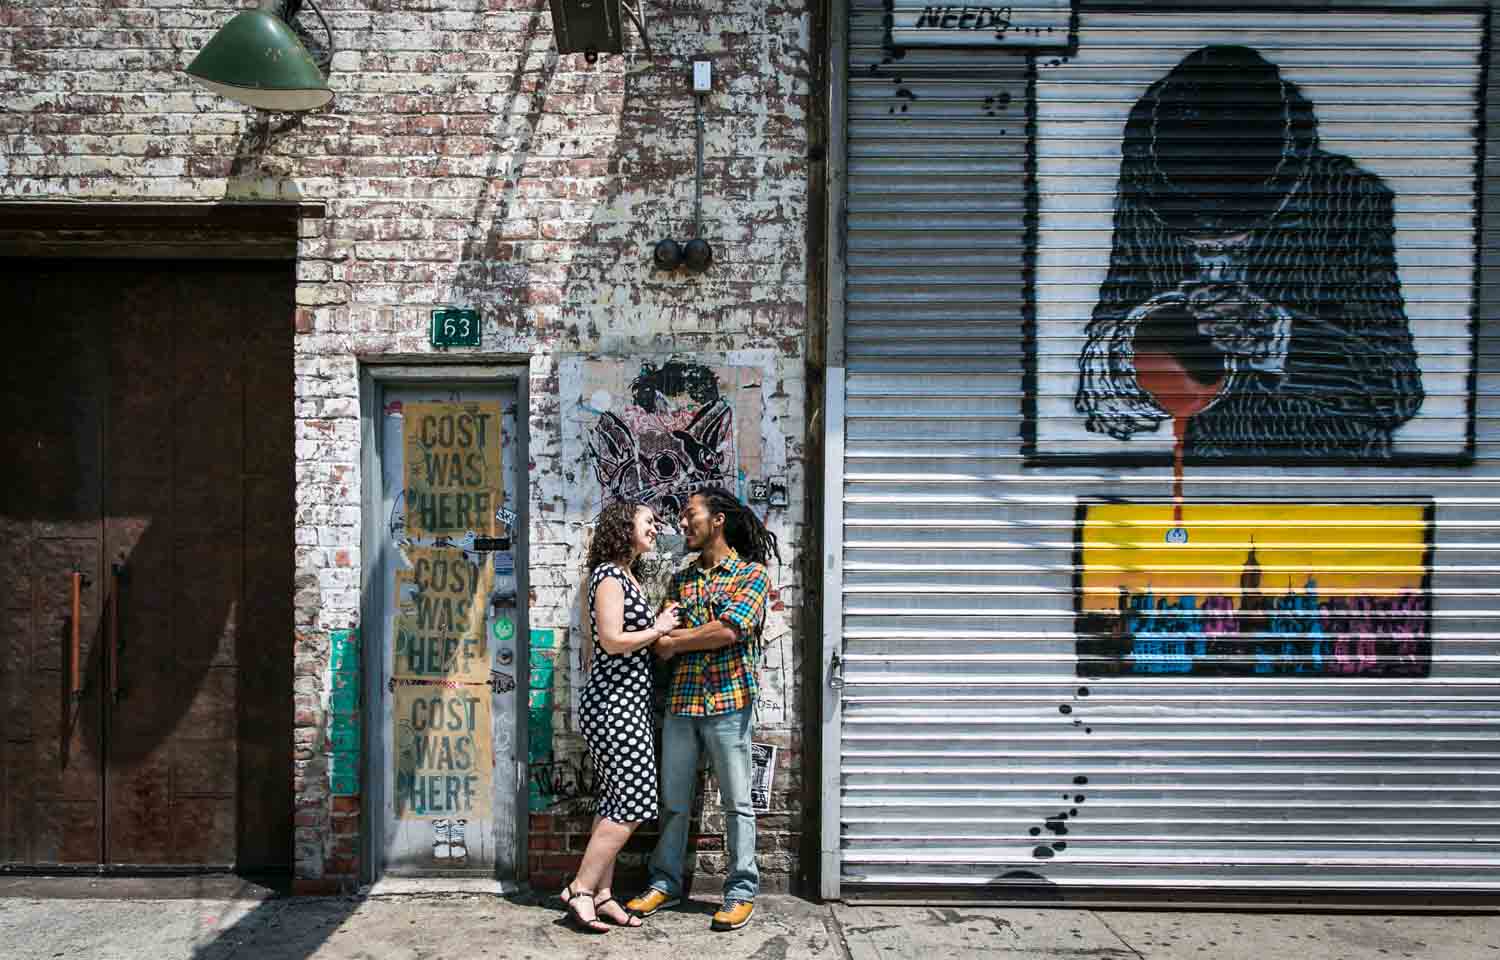 Meatpacking District engagement photos of couple dancing in front of graffiti wall